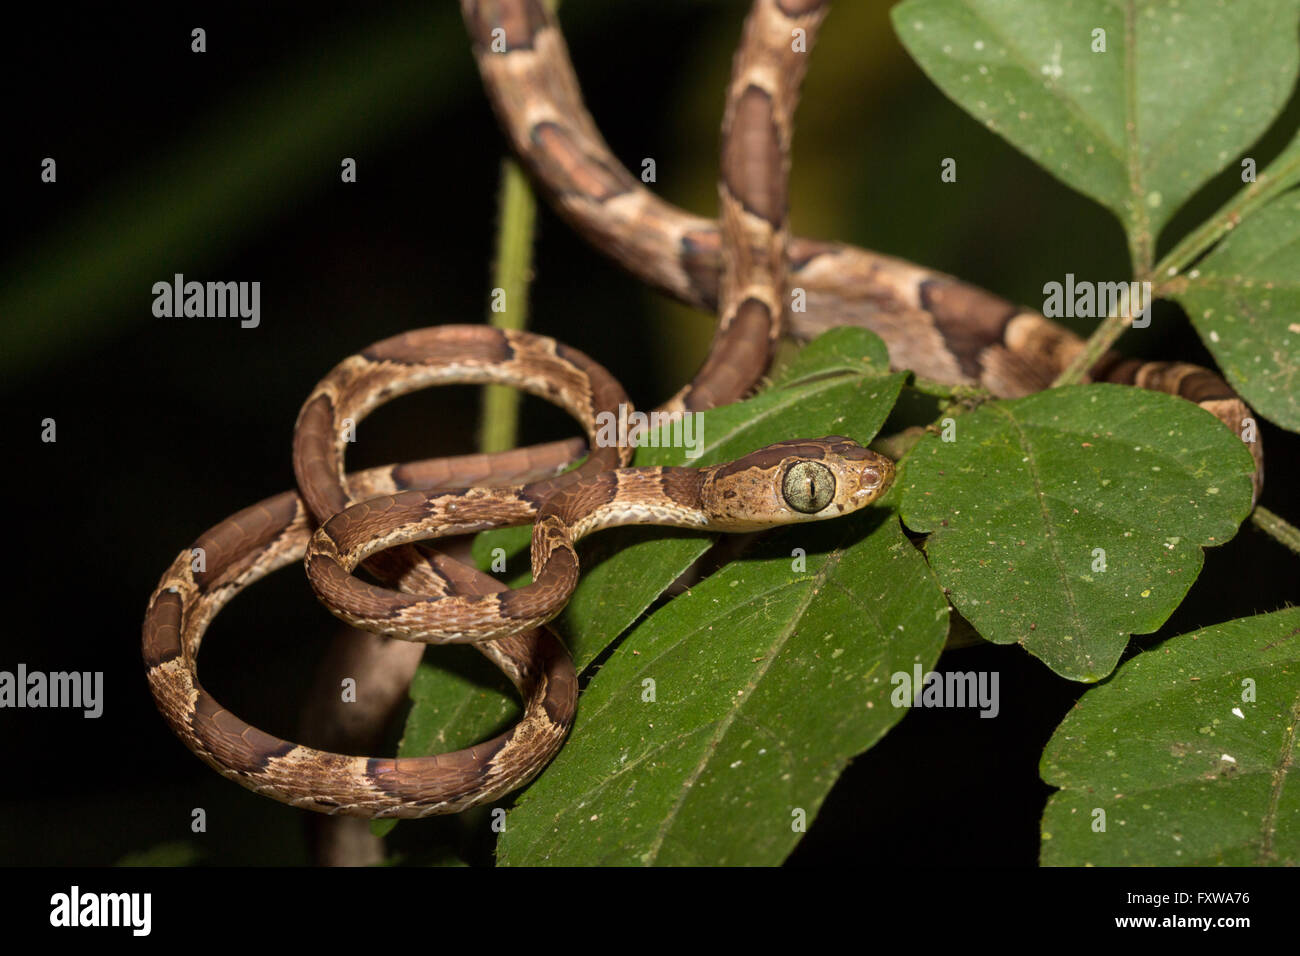 Imantodes cenchoa - close up of a rown blunt-headed vine snake Stock Photo